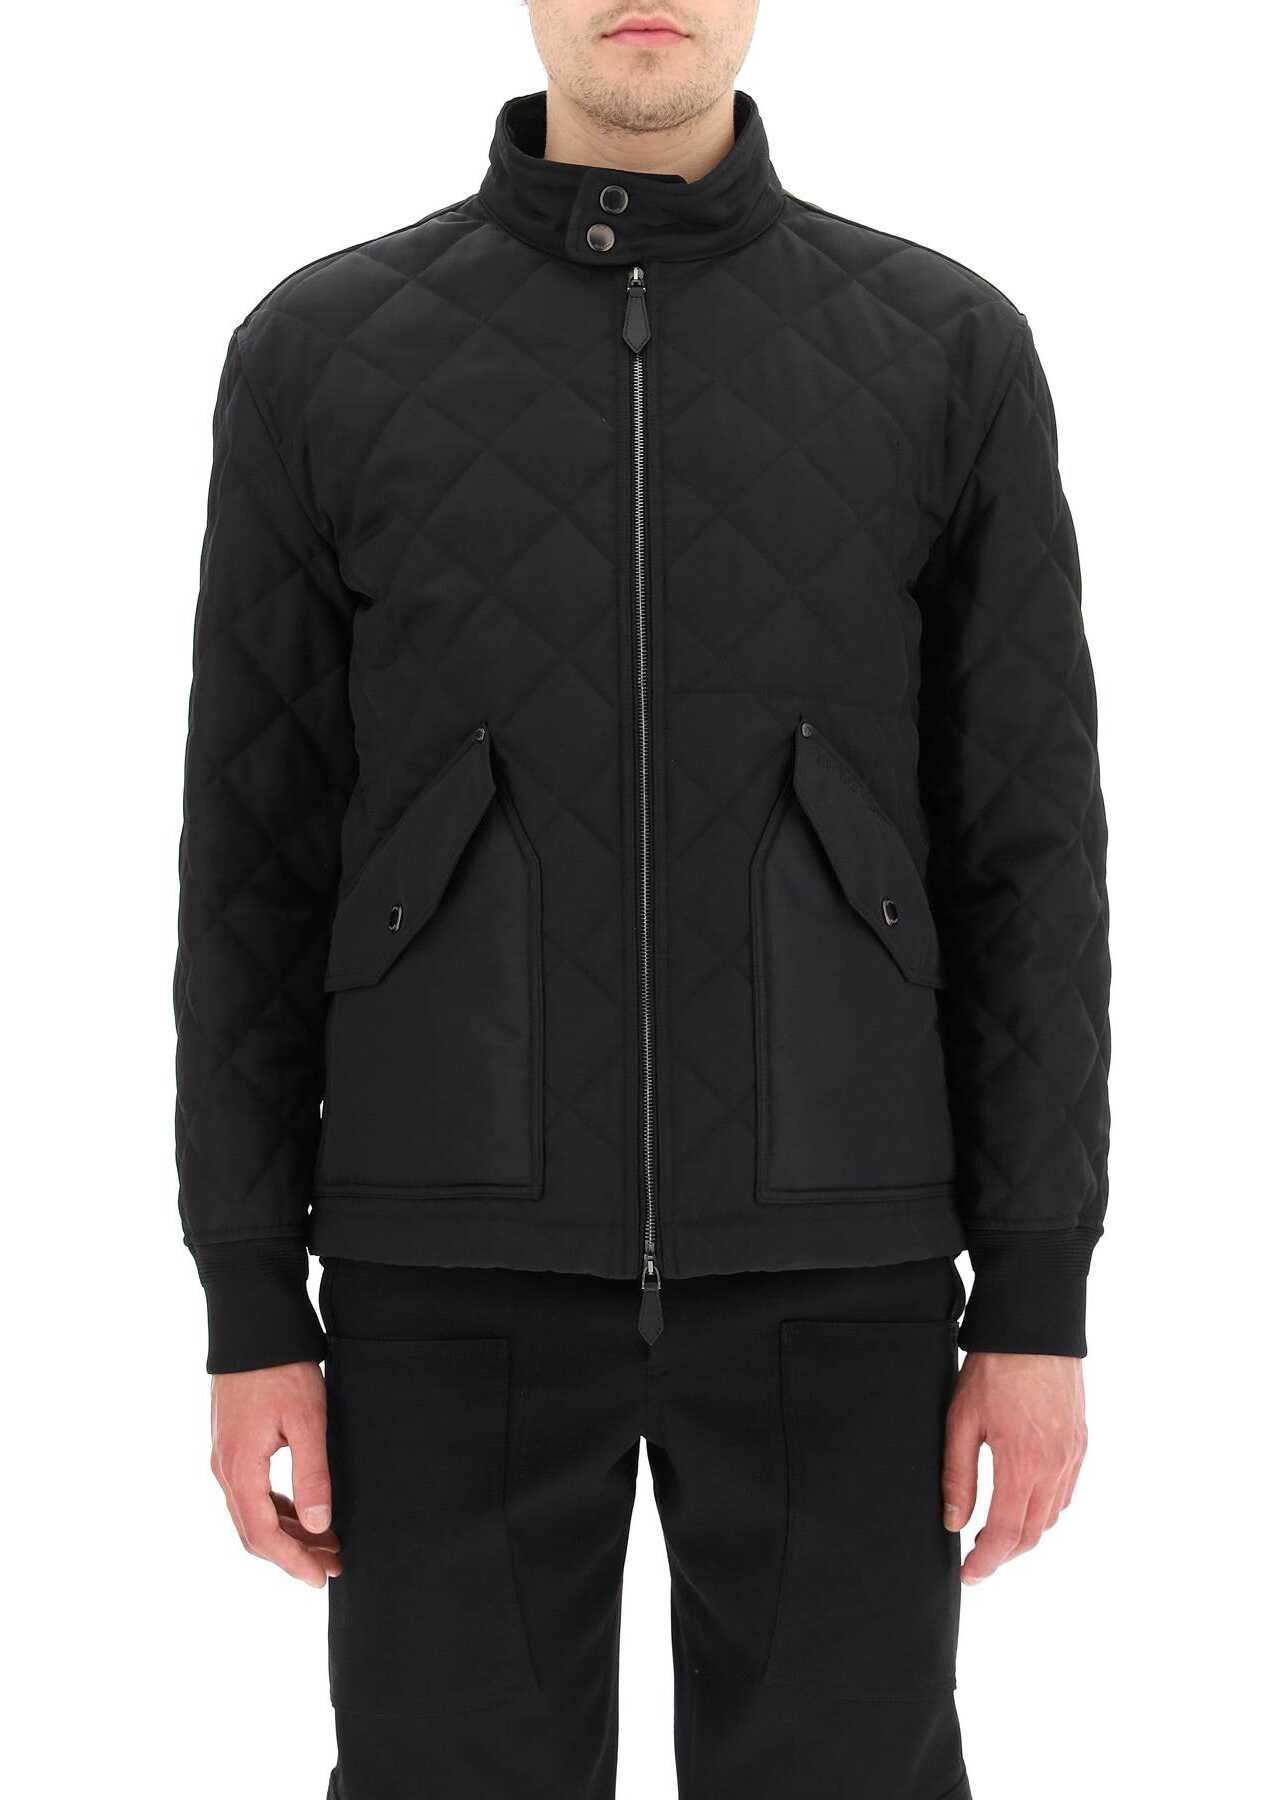 Burberry Diamond-Quilted Thermoregulated Jacket BLACK